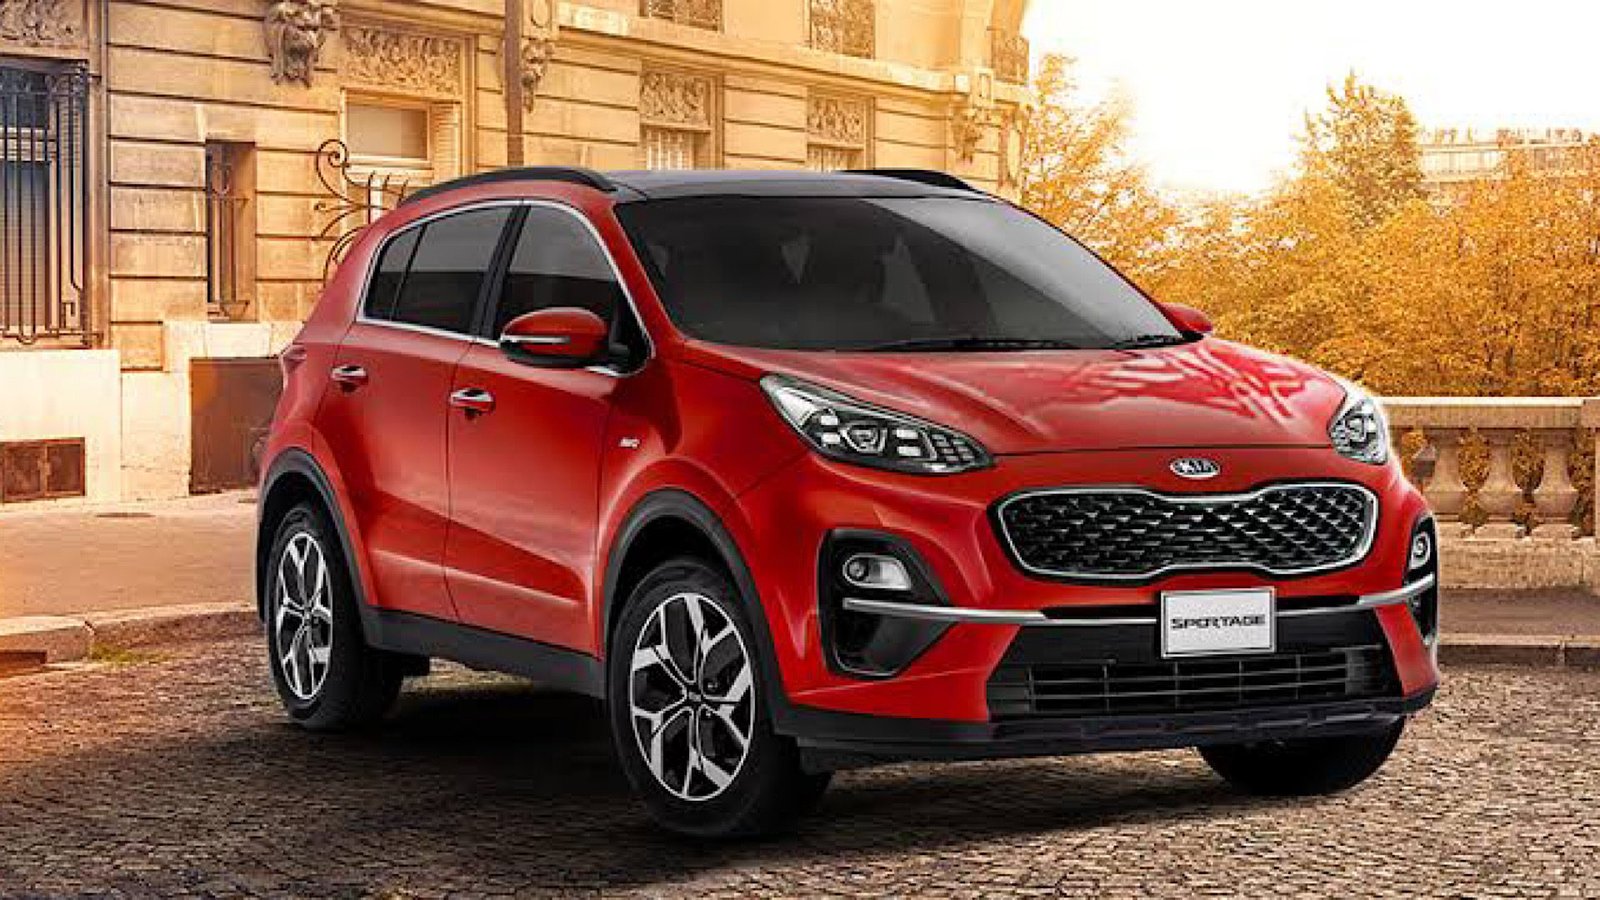 Kia Sportage Prices Reduced by Up to Rs. 300,000